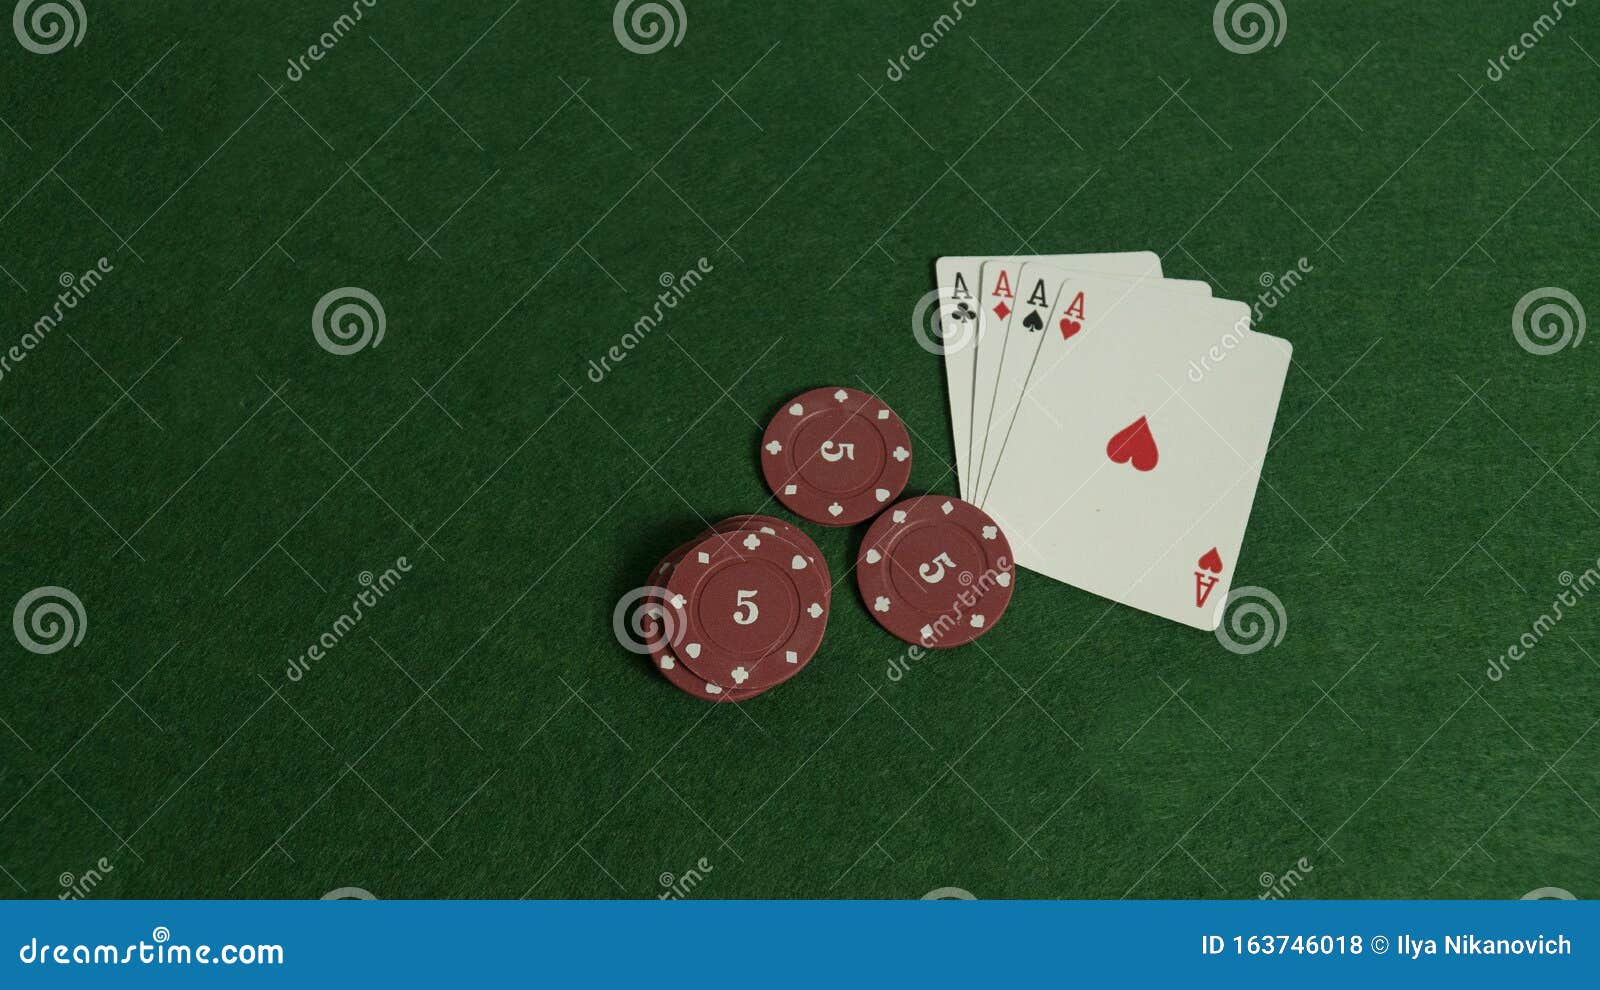 poker table. the combination of playing cards. win at the casino. black jack. betting at the casi